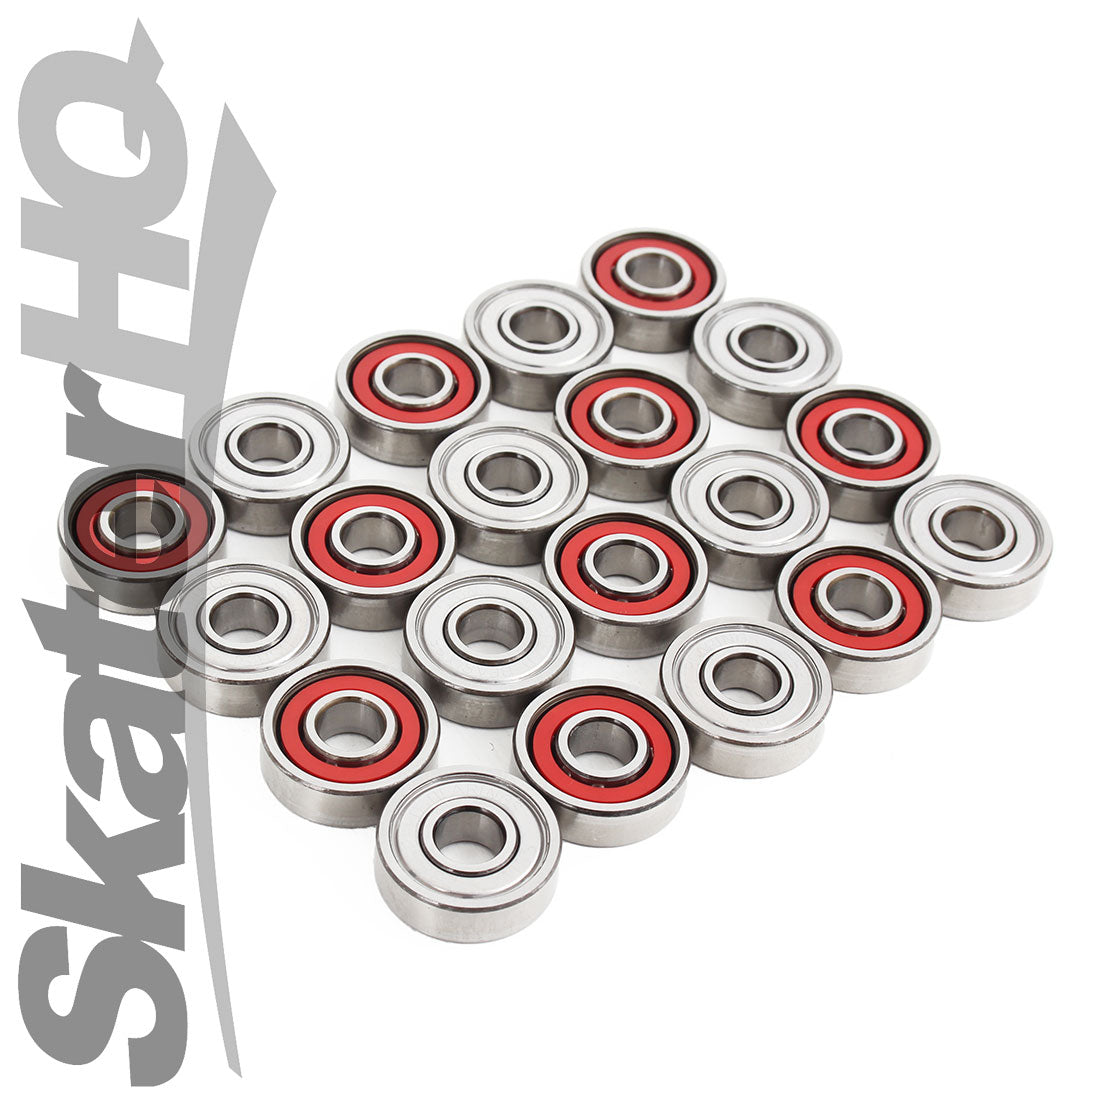 BSB Swiss 8mm Inline Bearings - 20pk Inline Hardware and Parts